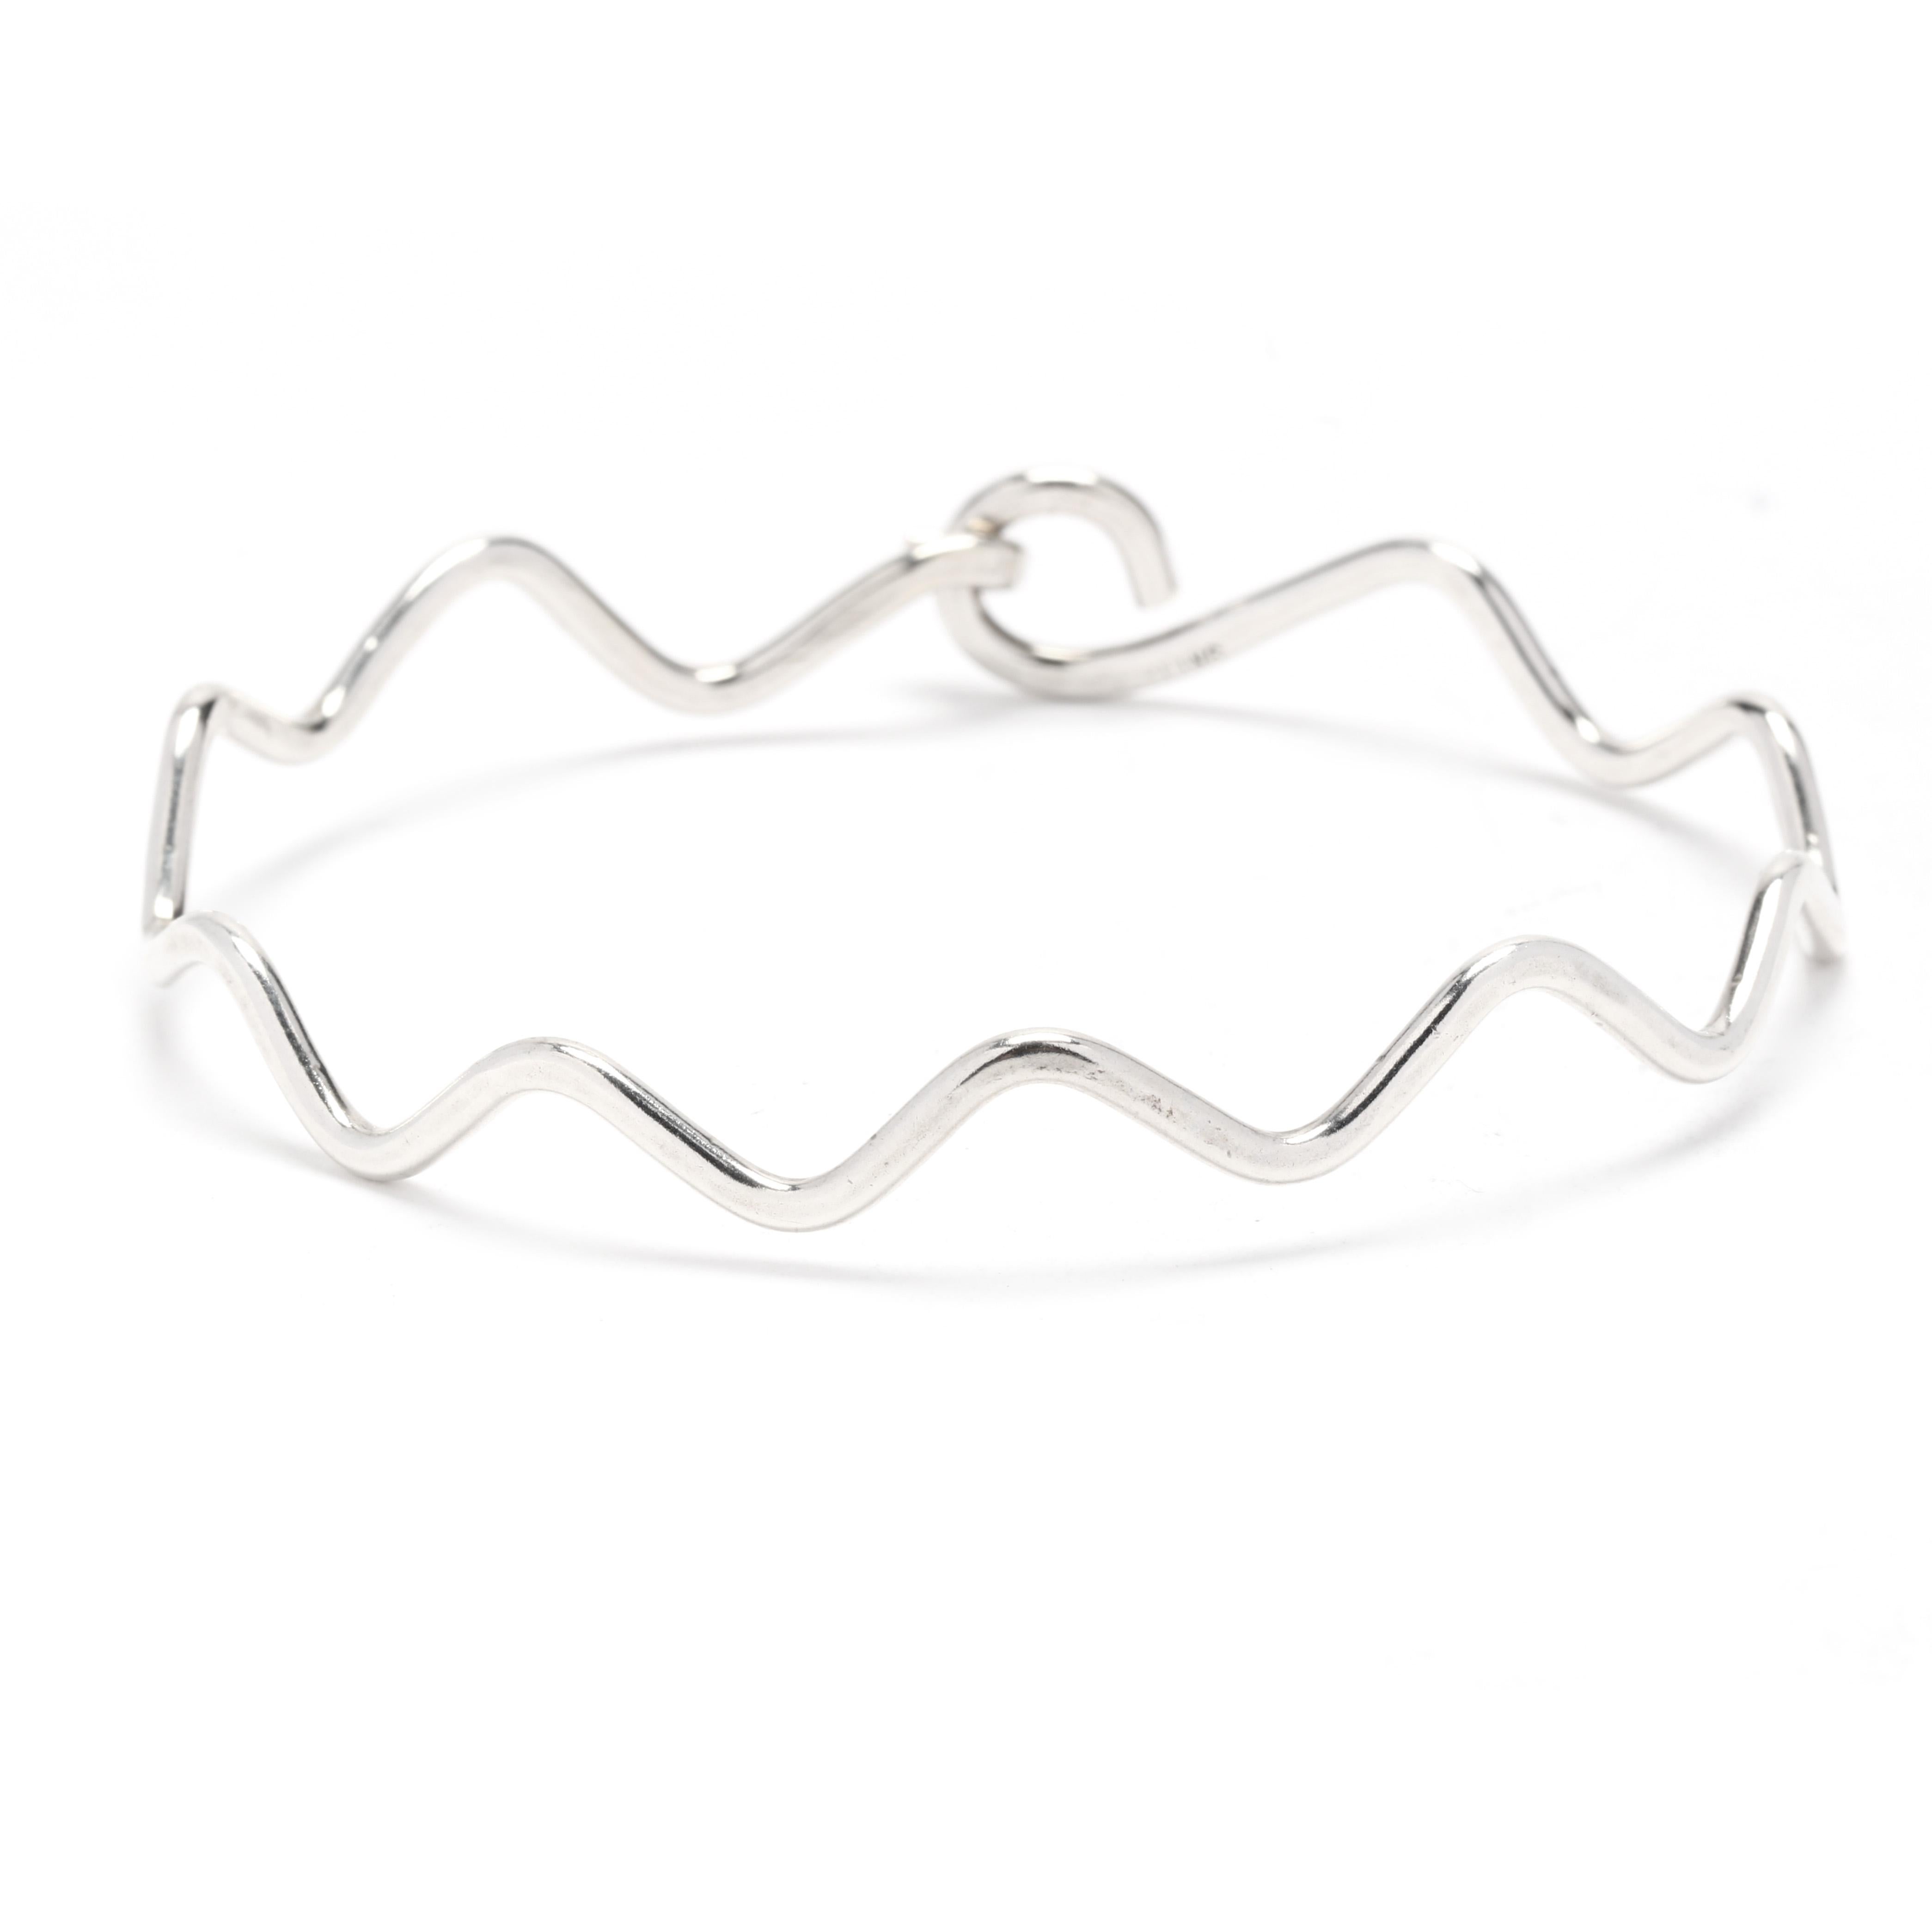 A vintage sterling silver Zig-Zag design bangle bracelet. This bracelet features an undulating zig-zag pattern with an integrated hook and eye closure. It is stamped Sterling. 

Length: 7.25 inch interior circumference

Width: 3/8 inch

Weight: 5.3